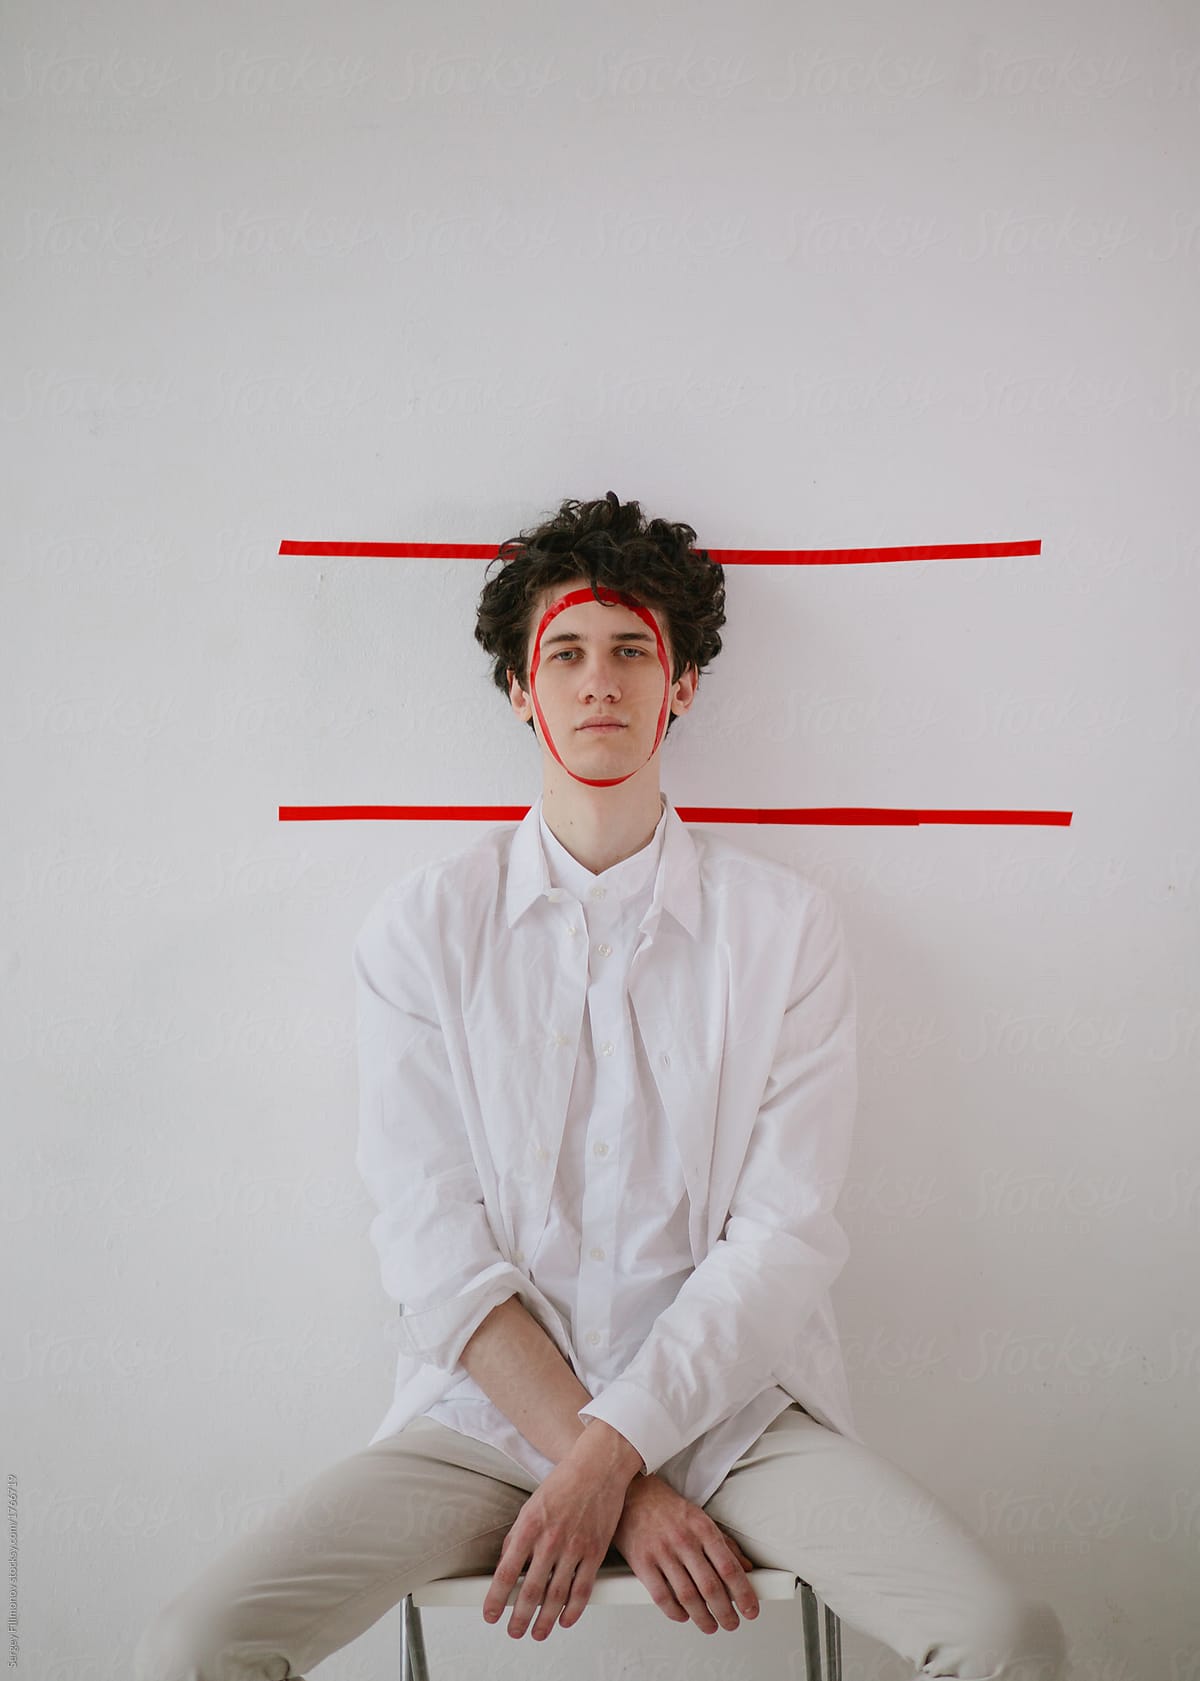 Young man posing with red sticky tape on his face